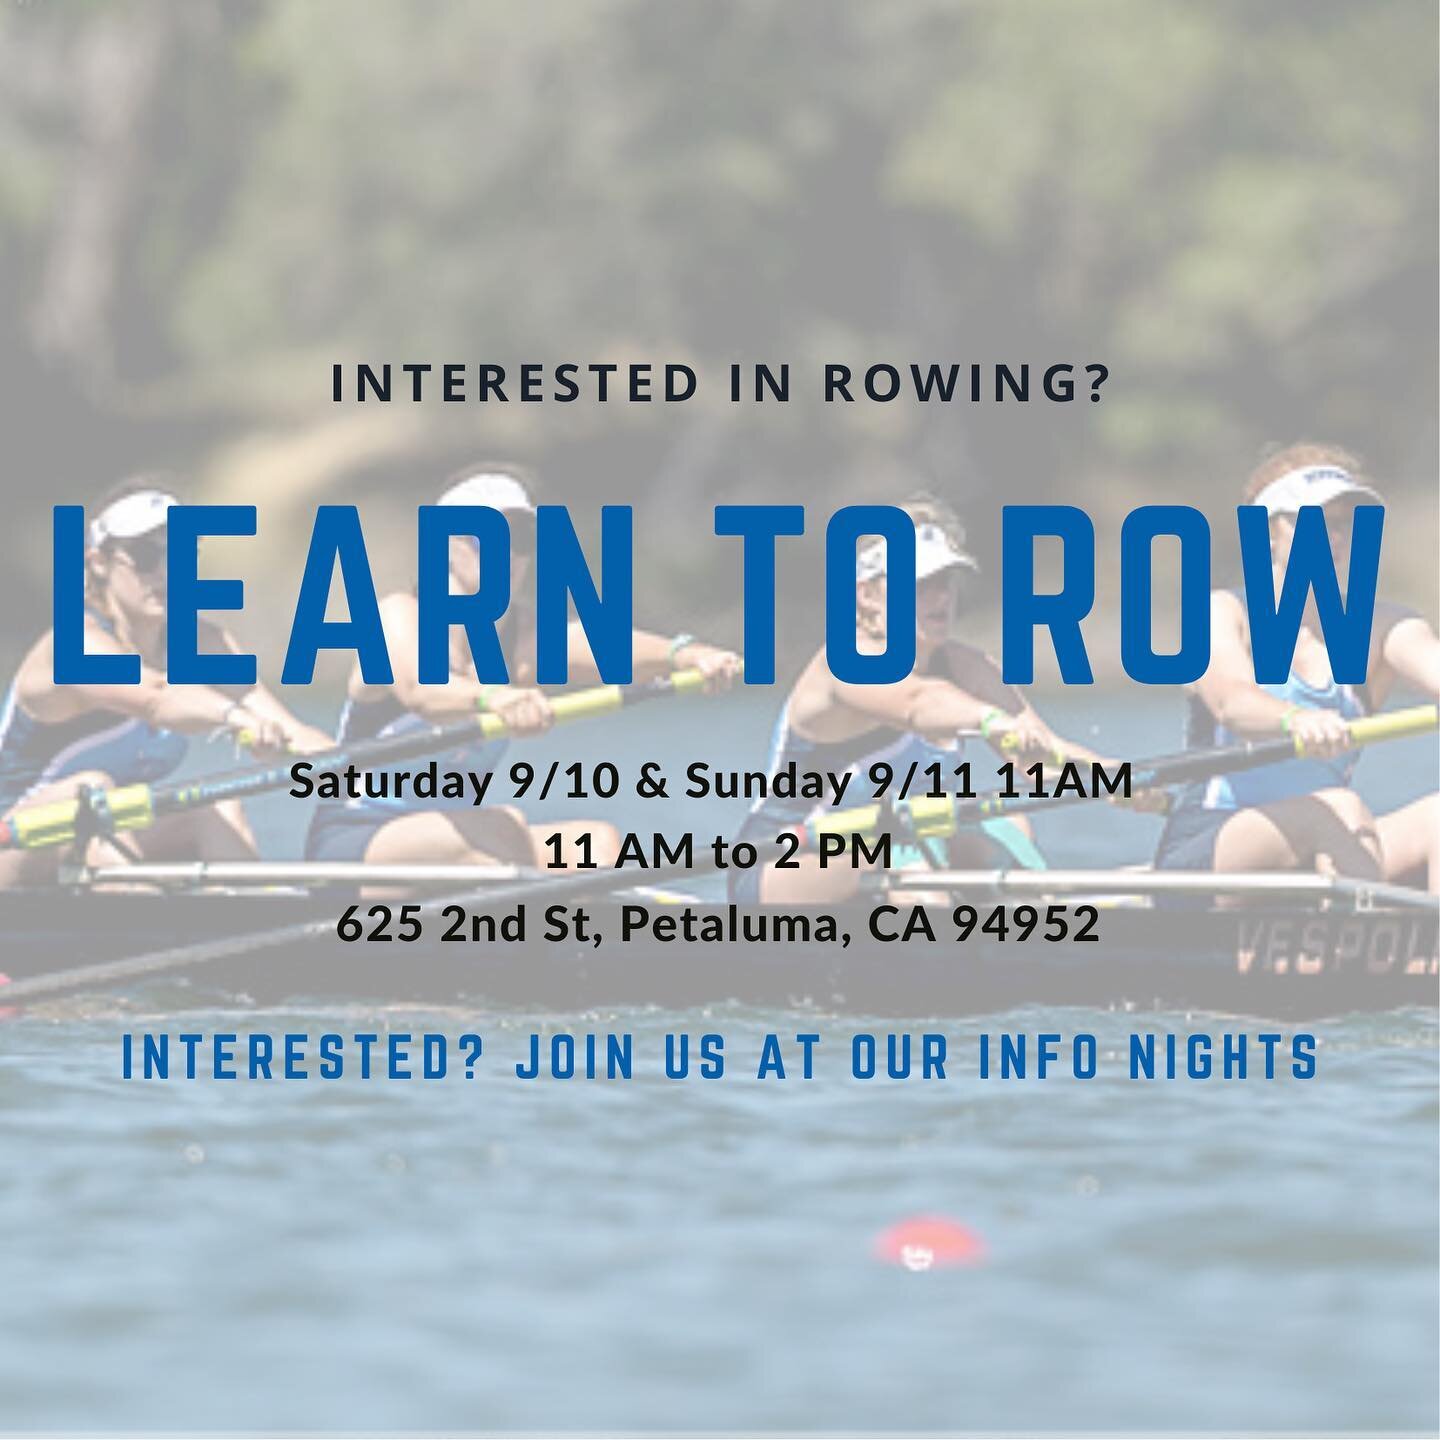 Want to learn how to row? 
Join us for a LEARN TO ROW
Saturday and Sunday 11 AM. We will have carpools to drive people from the flagpoles on campus (be there at 10:40 at the latest). Wear clothes to work out in, bring a water bottle, sunscreen, and a